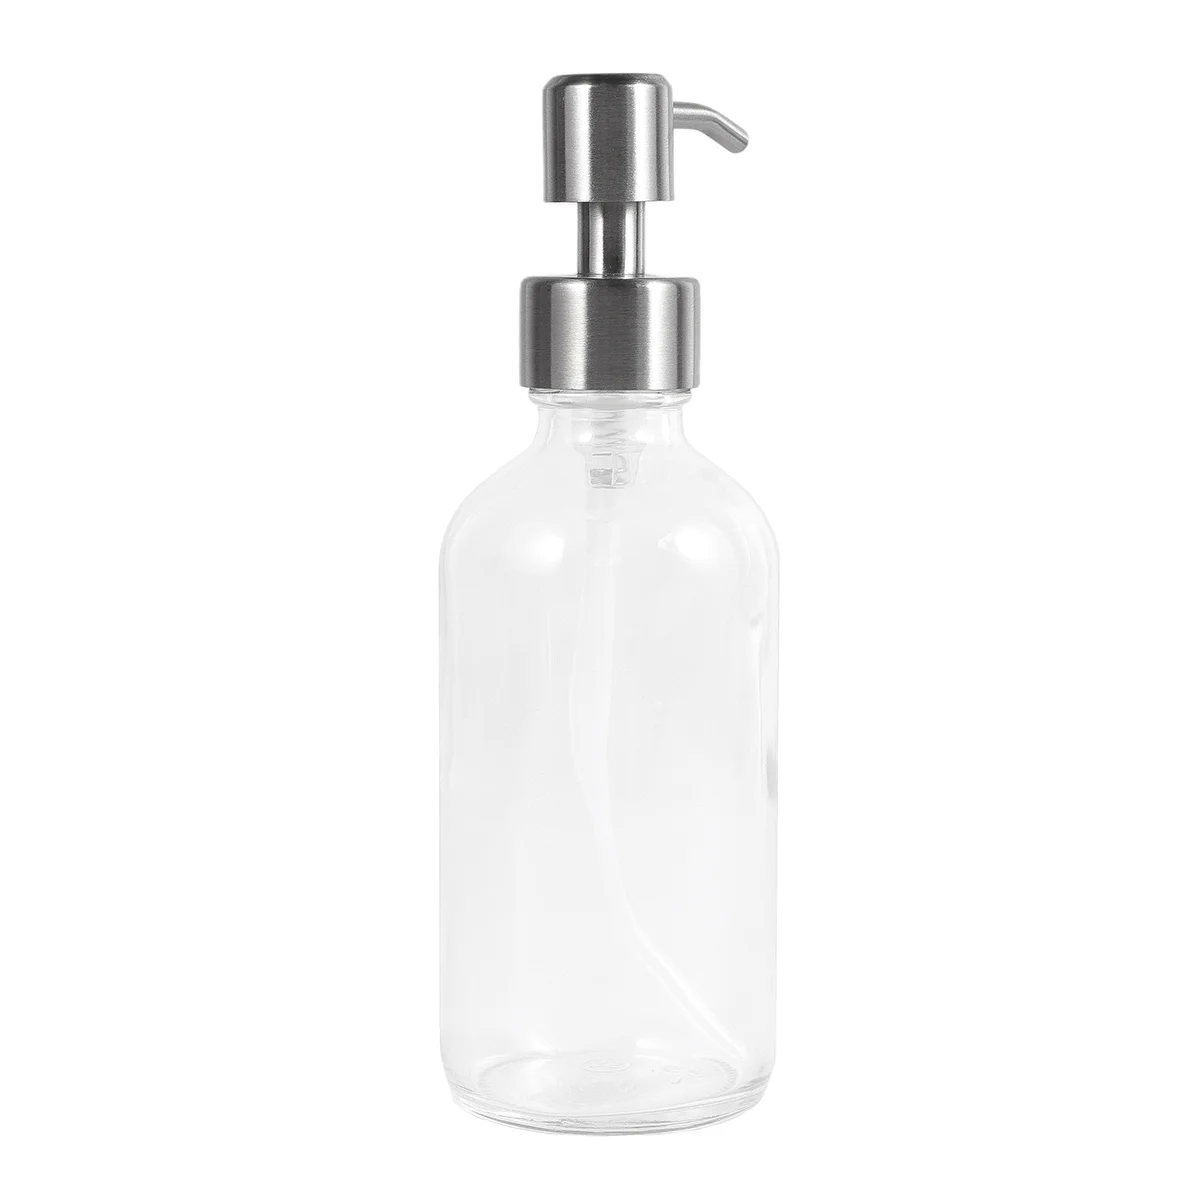 

230 Ml Shampoo Conditioner Dispenser Stainless Steel Pump Bottle Rust Proof Glass Travel Containers Lotion Refillable